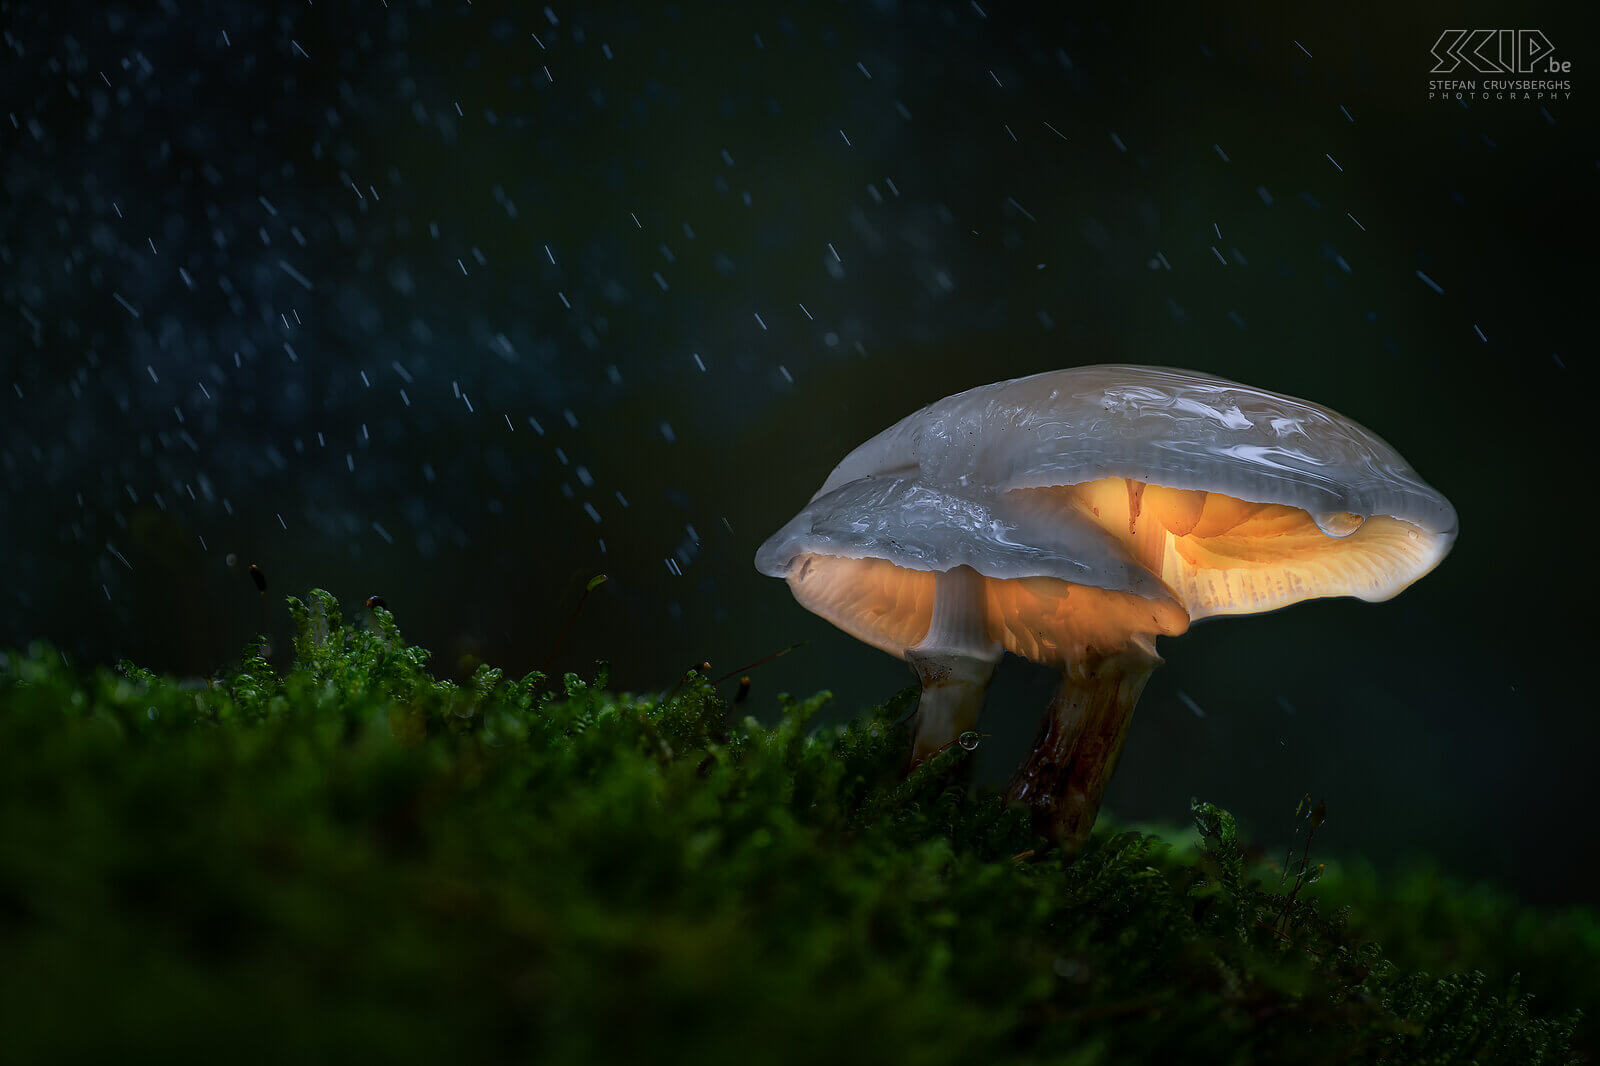 Glowing mushrooms When I went out in the evening in the forests of Averbode I discovered some beautiful glowing mushrooms; an ingenious trick from mother nature, gnomes who leave their lights on or just a creative photographer, ...;-) Stefan Cruysberghs